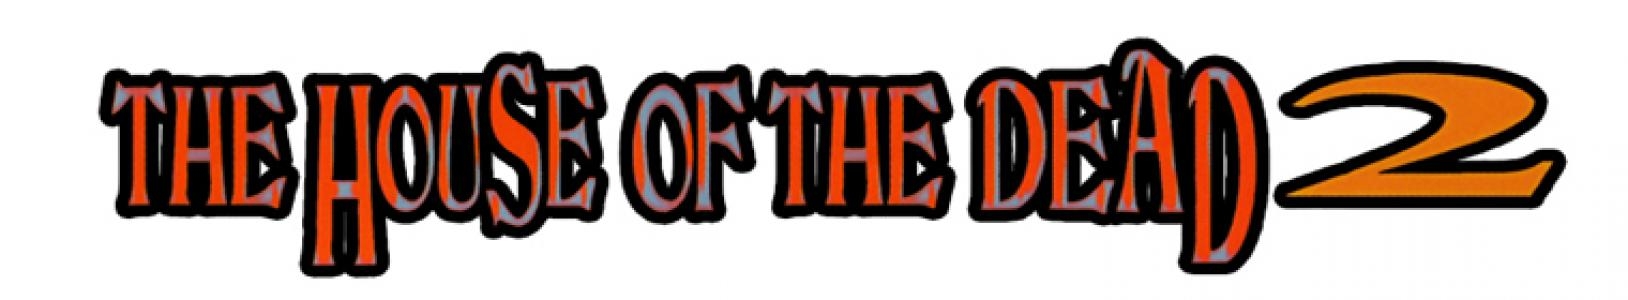 The House of the Dead 2 banner